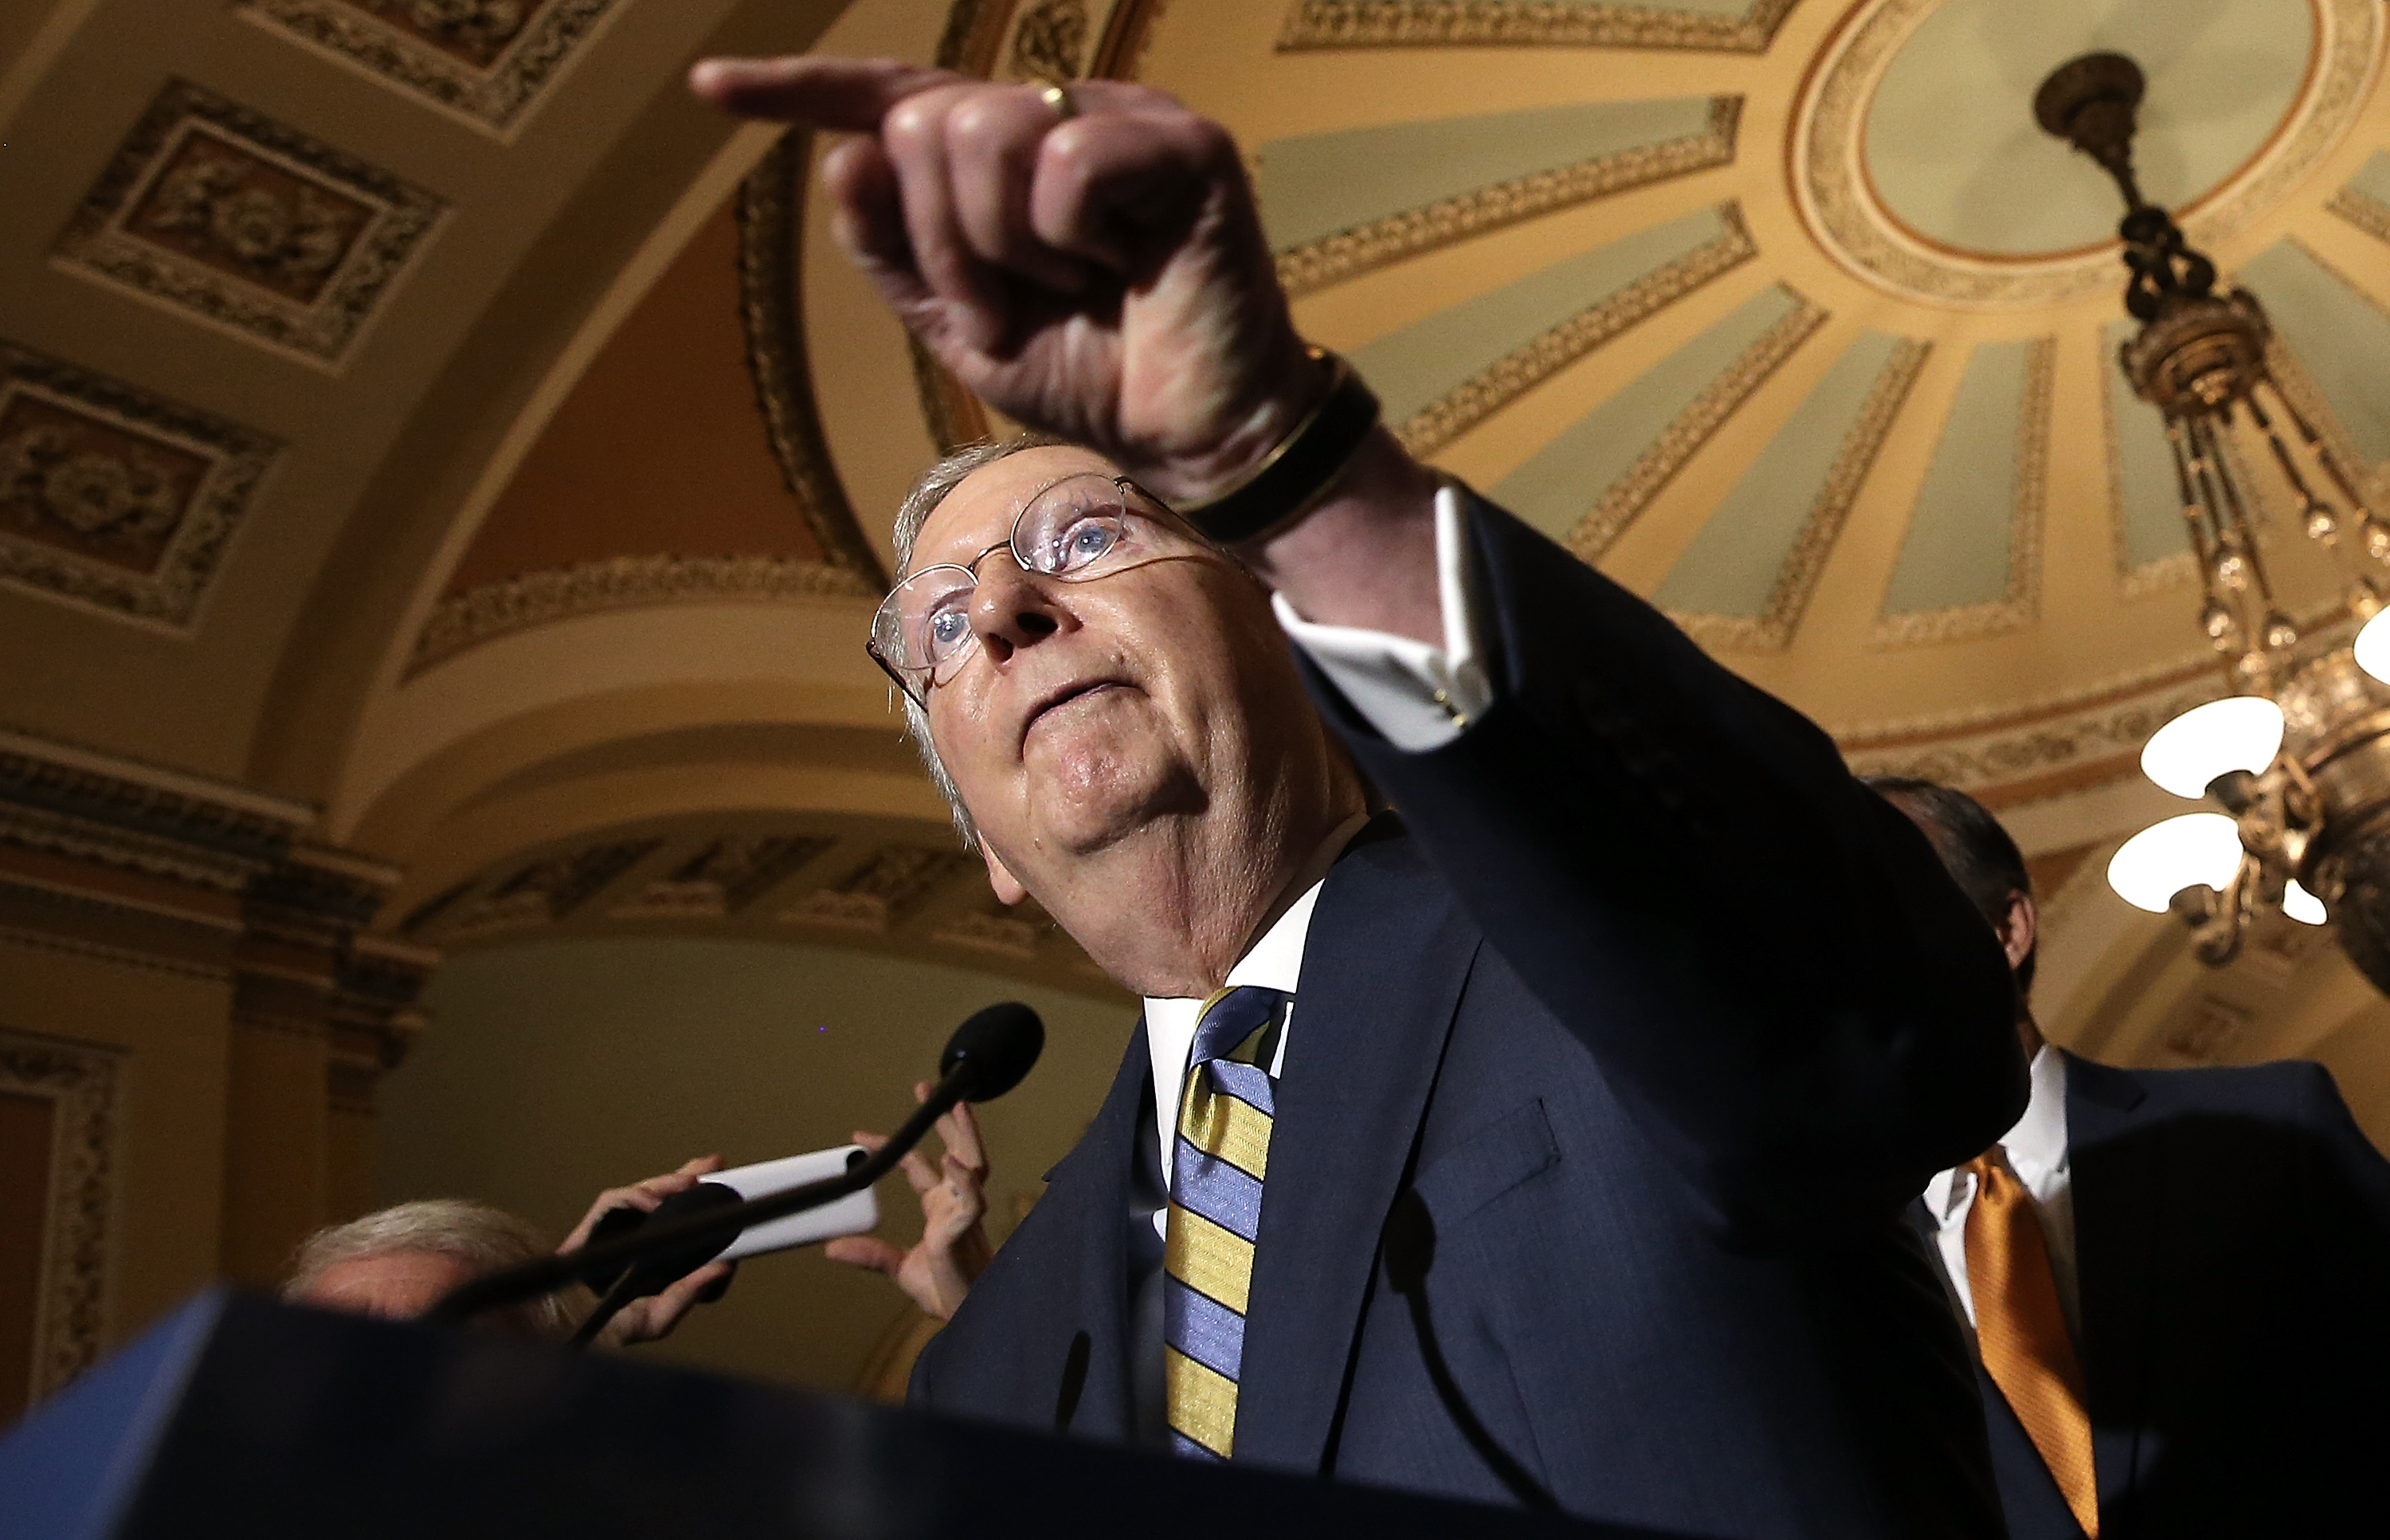 Senate Majority Leader Mitch McConnell (R-KY) answers questions at the U.S. Capitol June 2, 2015 in Washington, D.C. (Win McNamee&mdash;Getty Images)